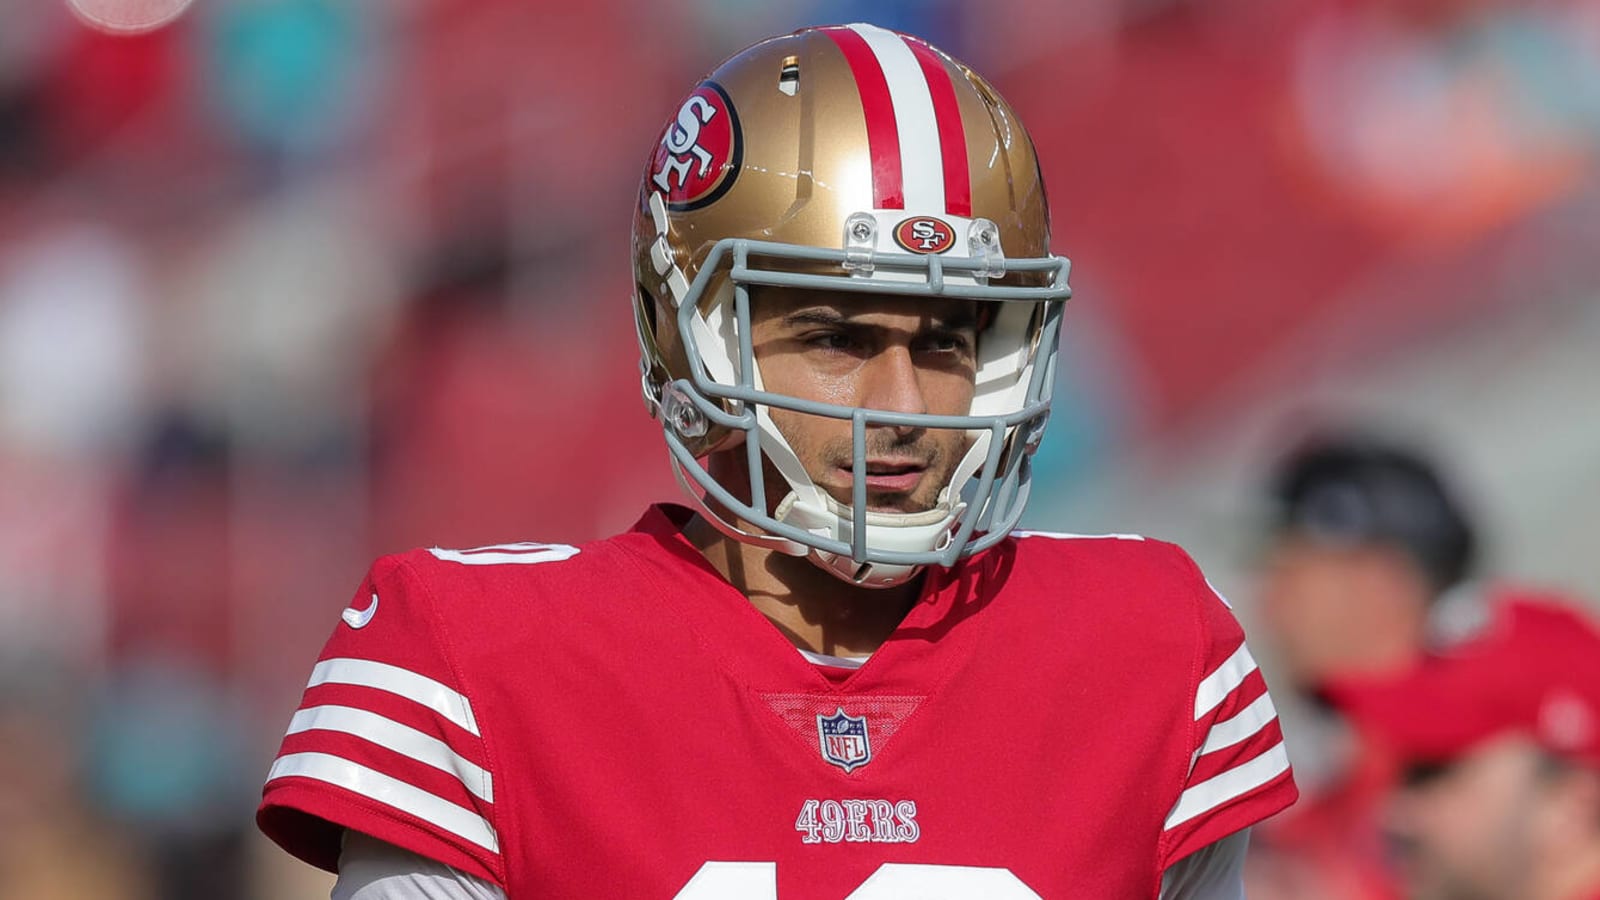 Report: Garoppolo does not need surgery, has chance to return